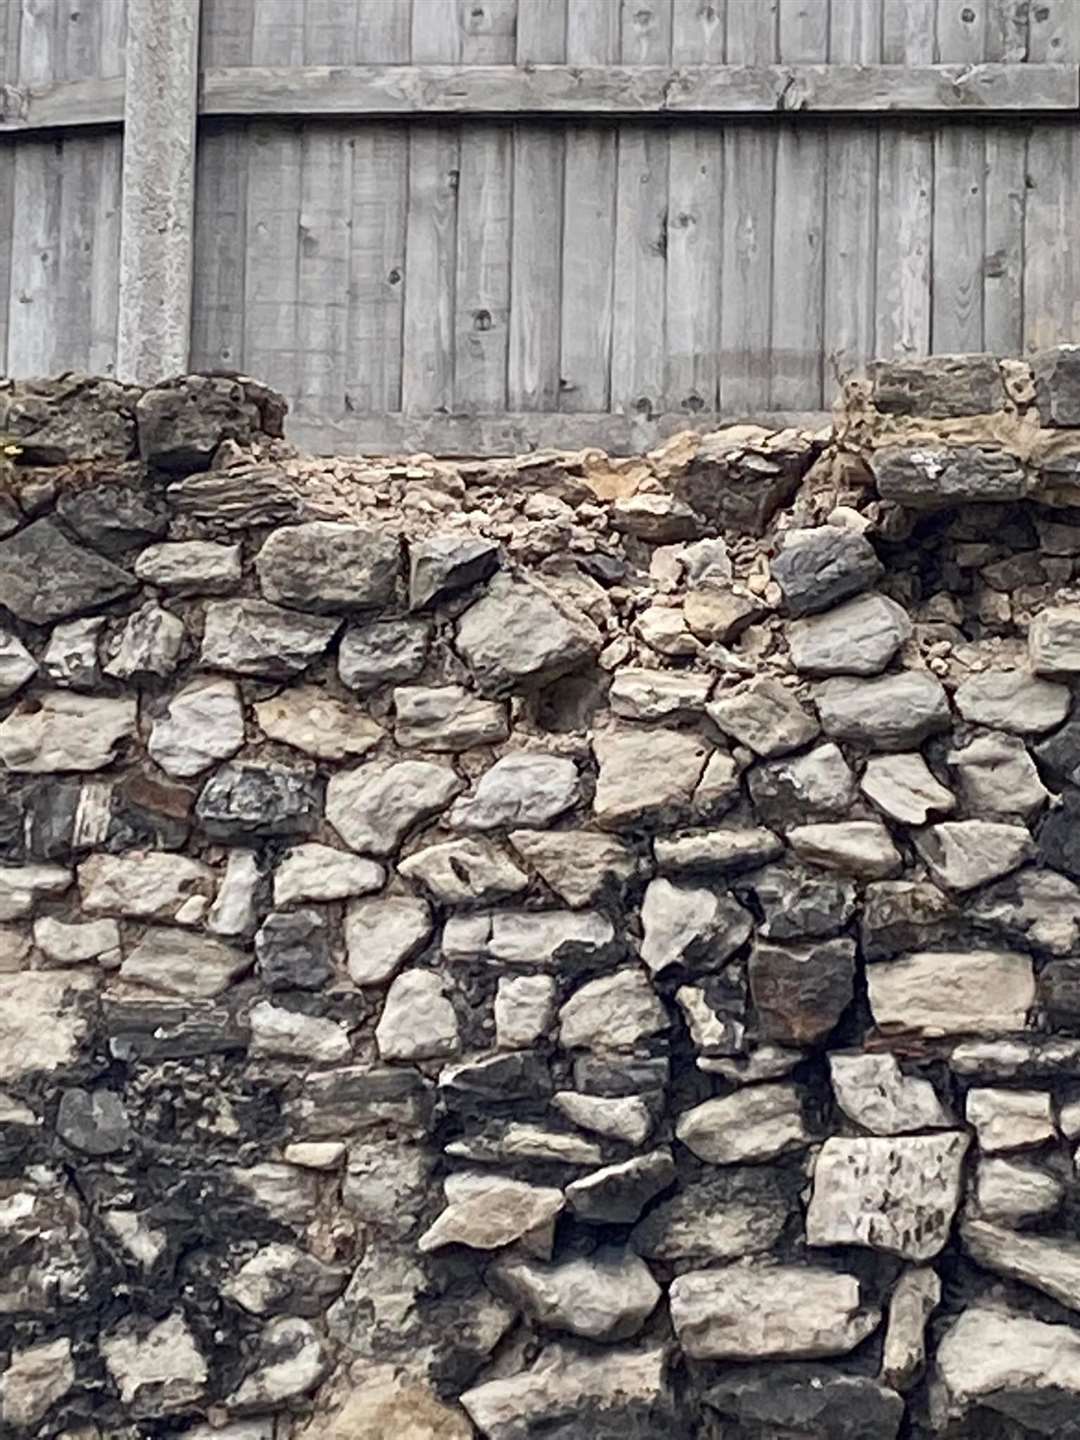 A gap left by fallen stones at the top of the wall. Images from Teresa Brighouse